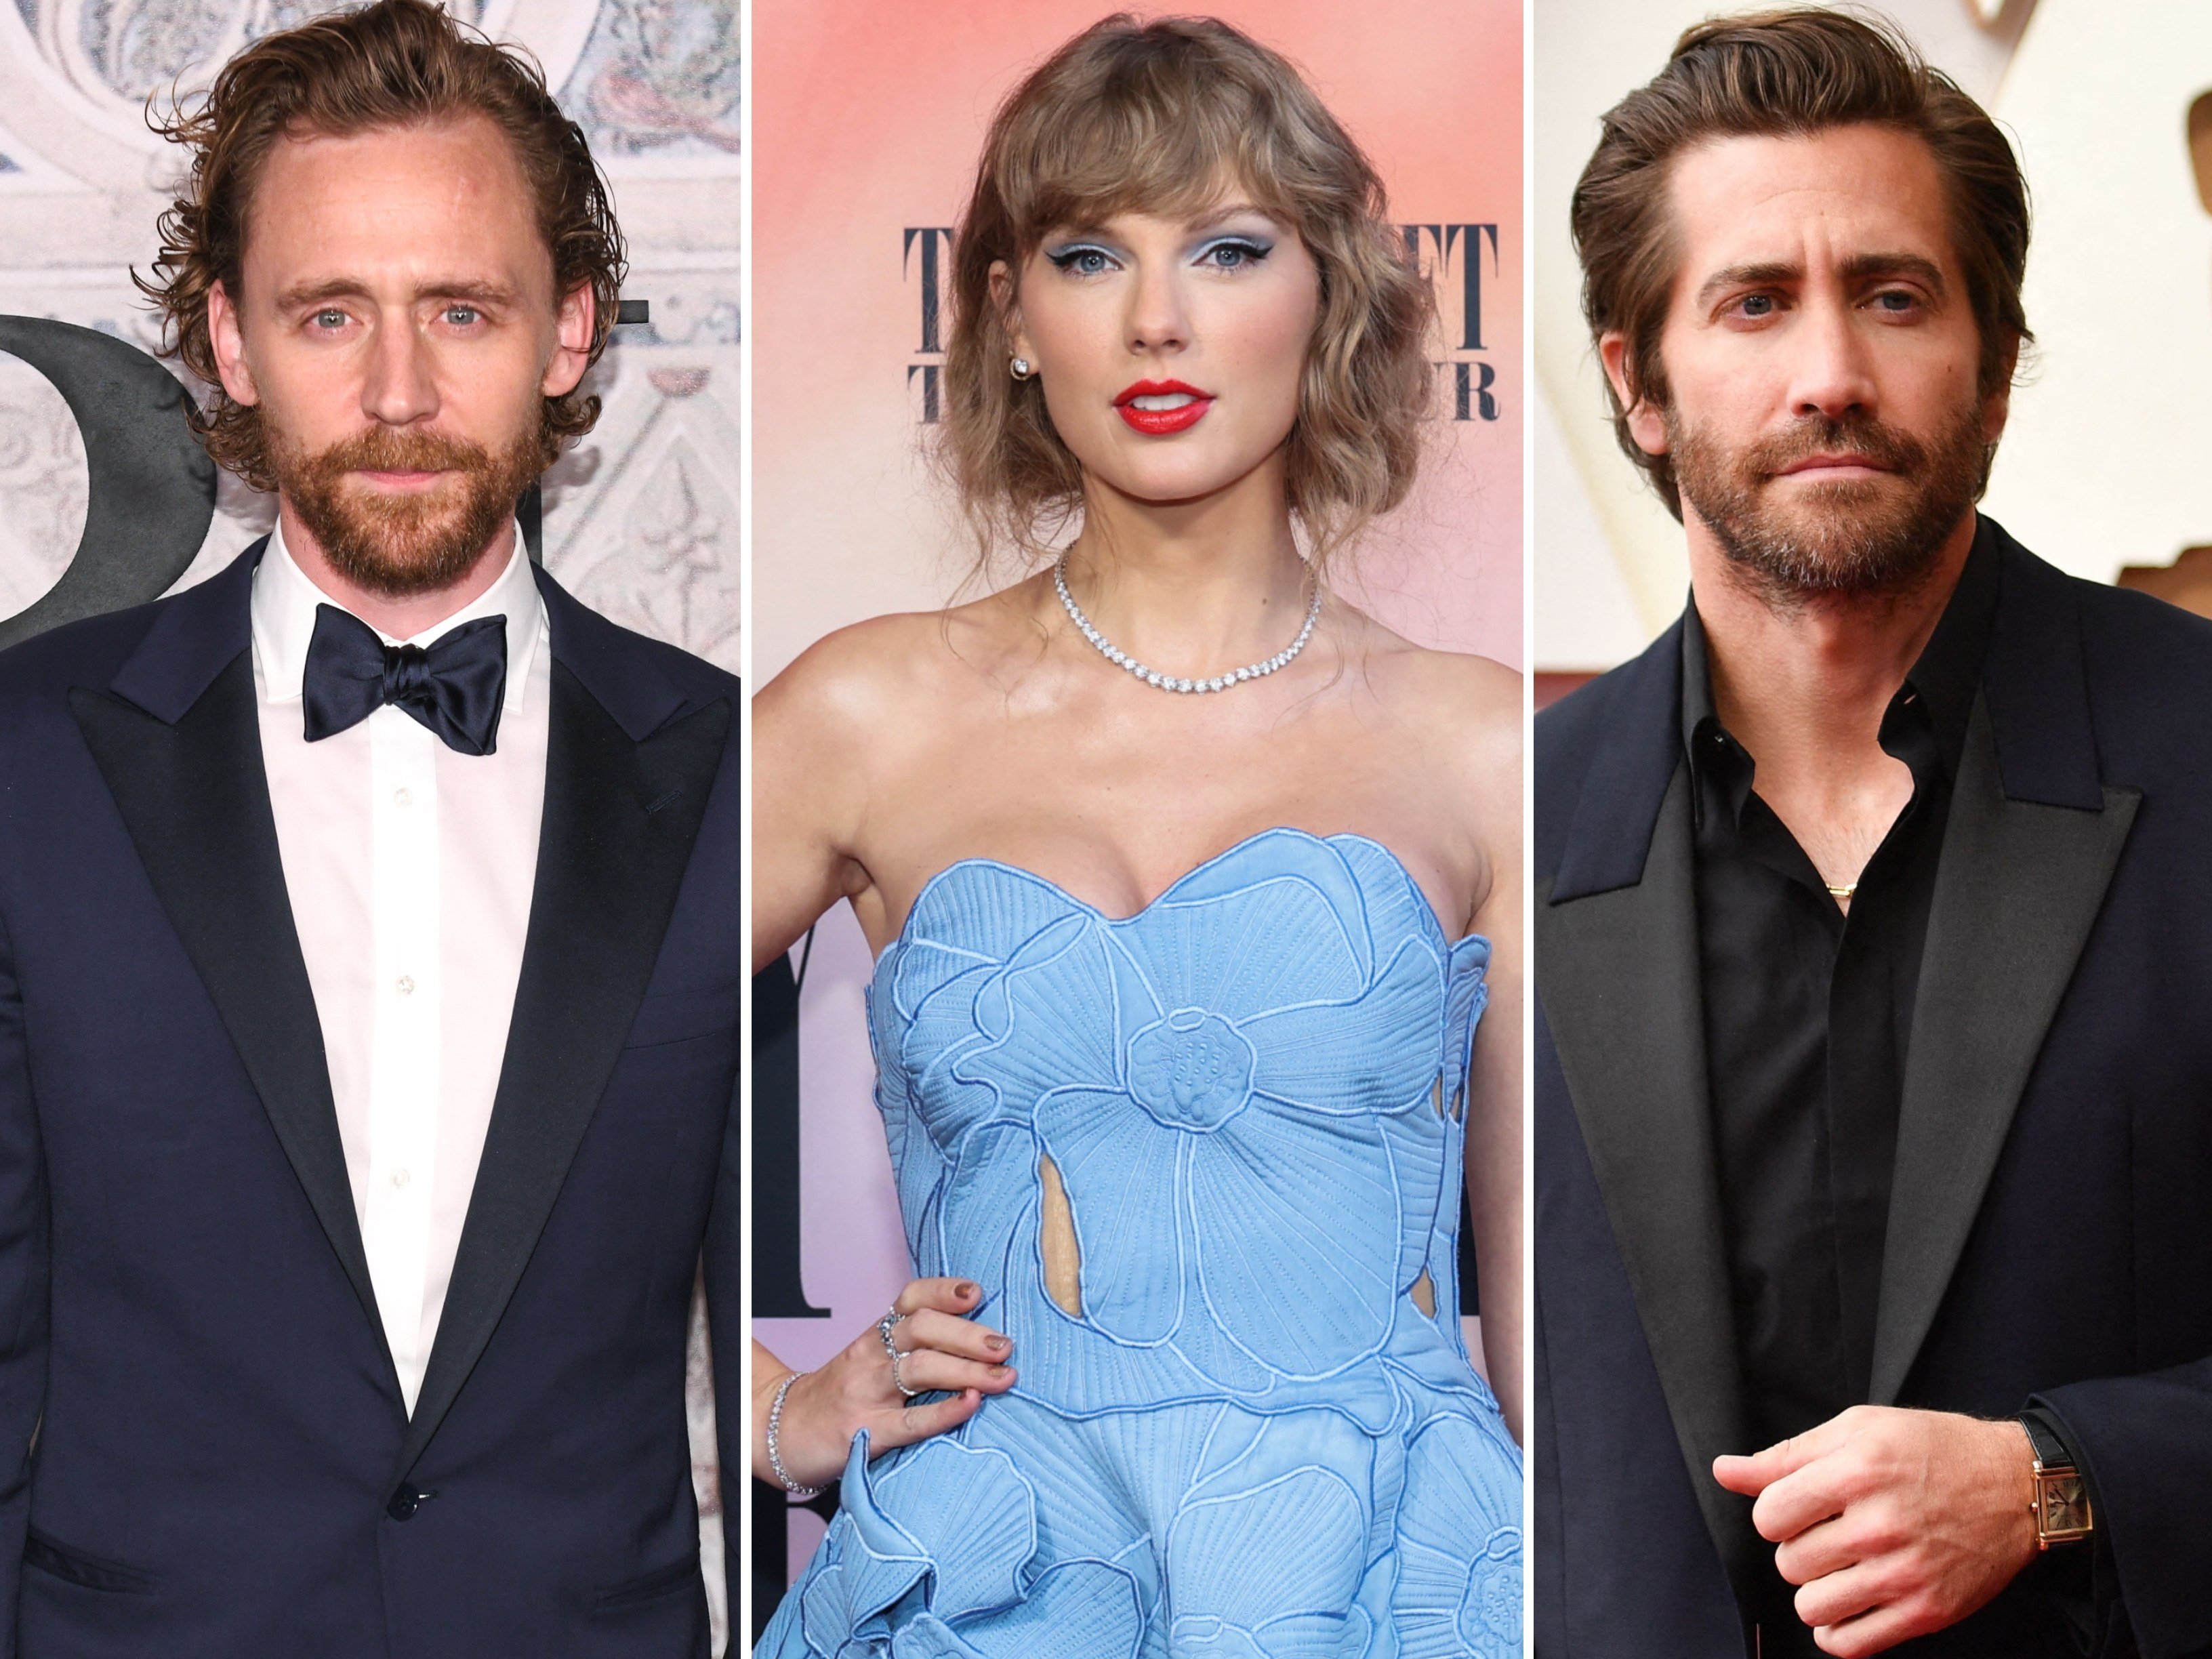 Taylor Swift’s many celebrity exes include actors Tom Hiddleston and Jake Gyllenhaal. Photos: AFP, BFA, Reuters